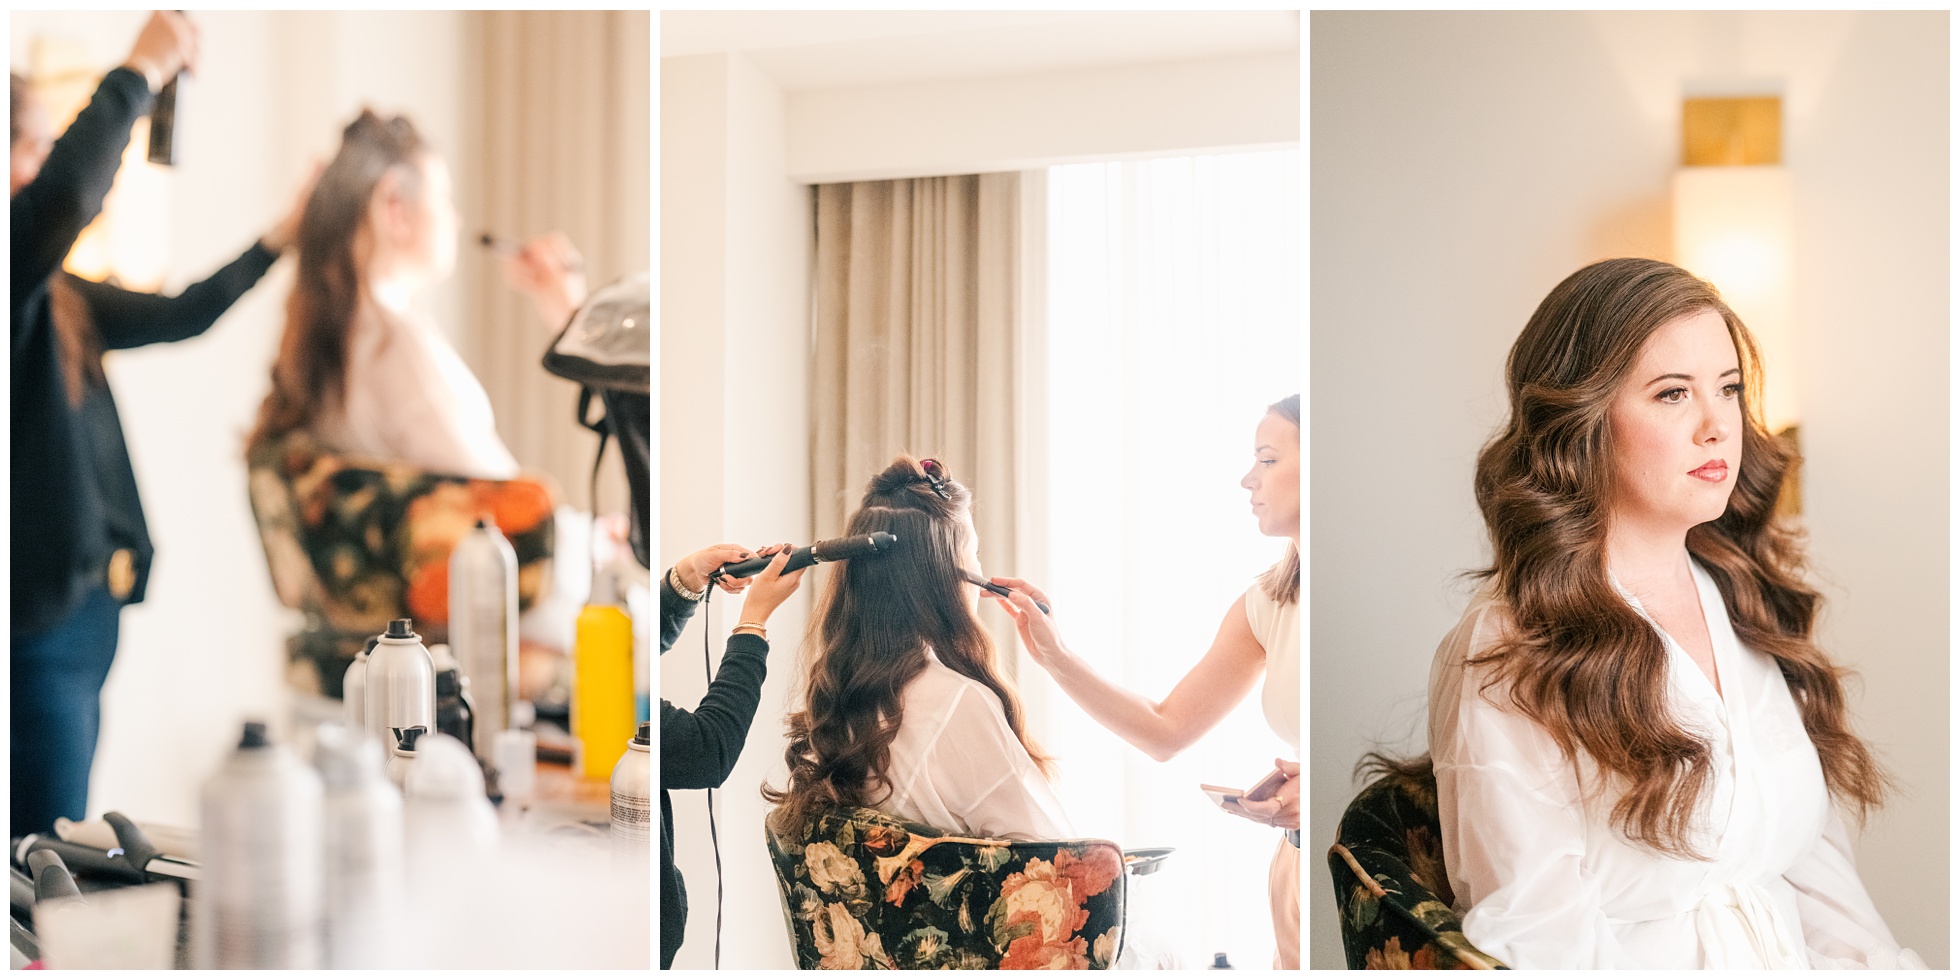 Bride getting ready for her wedding at the C.Baldwin hotel in Houston.